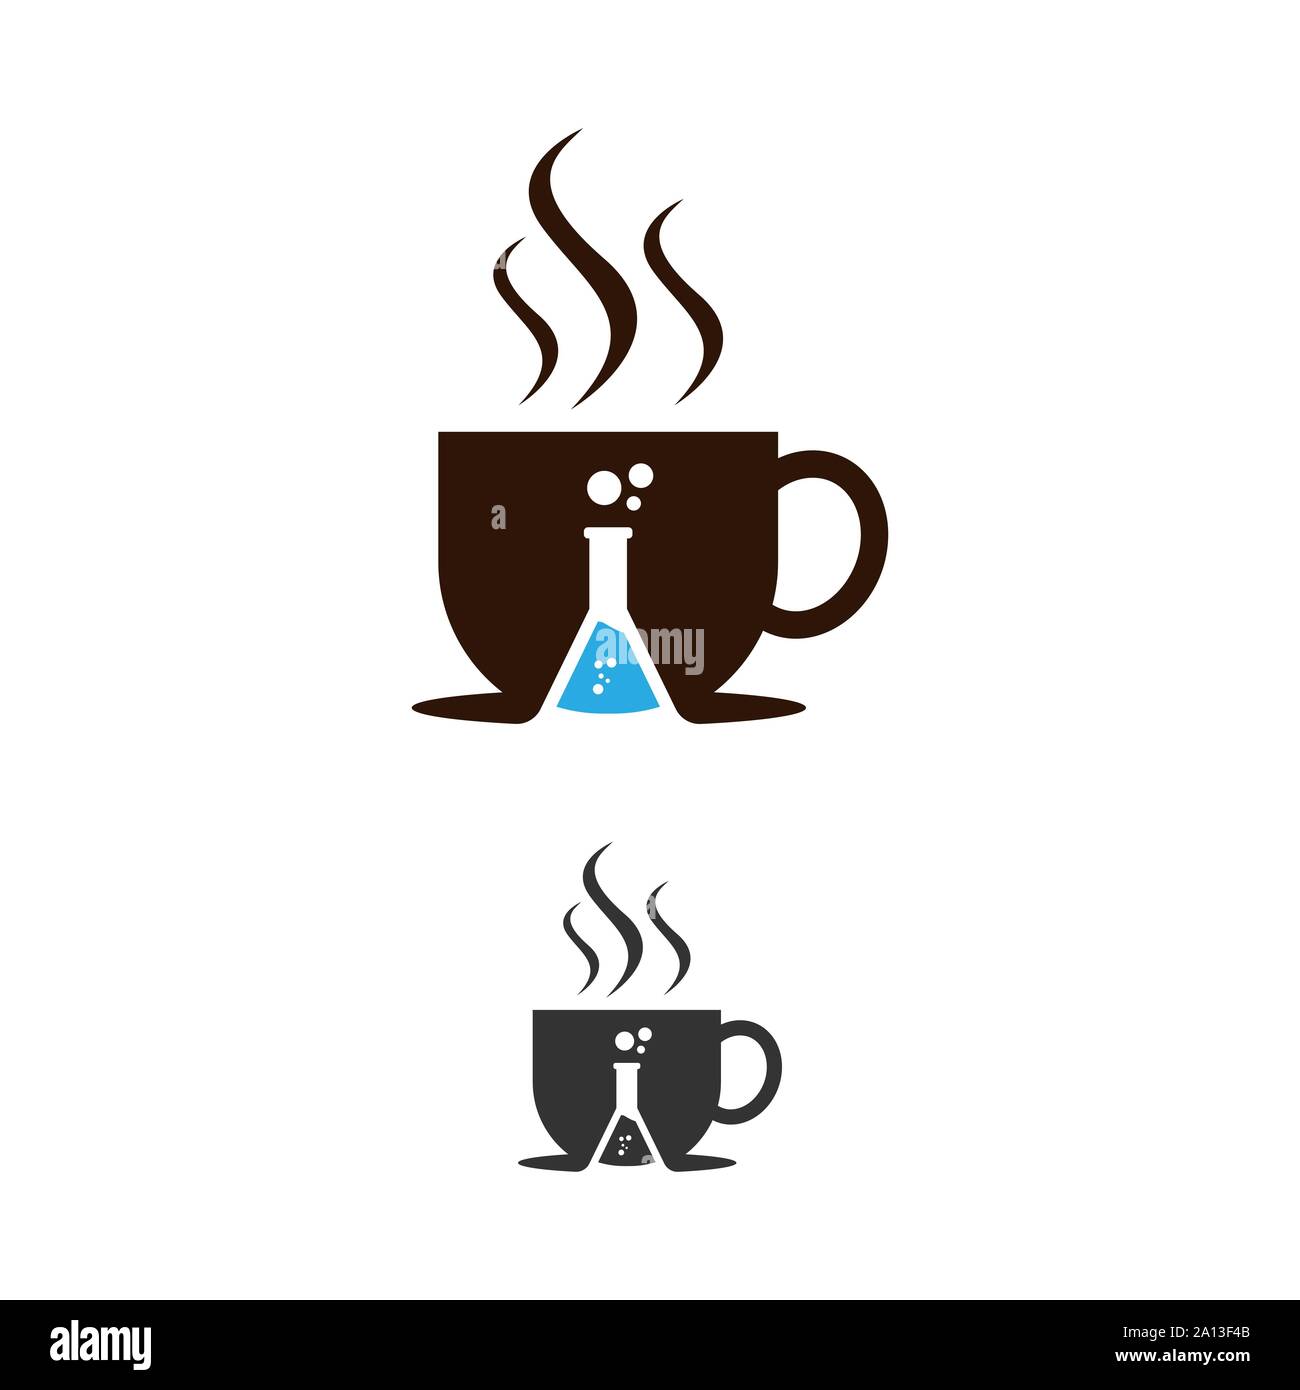 Coffee and lab bottle food and drink logo with negative space style design vector Stock Vector